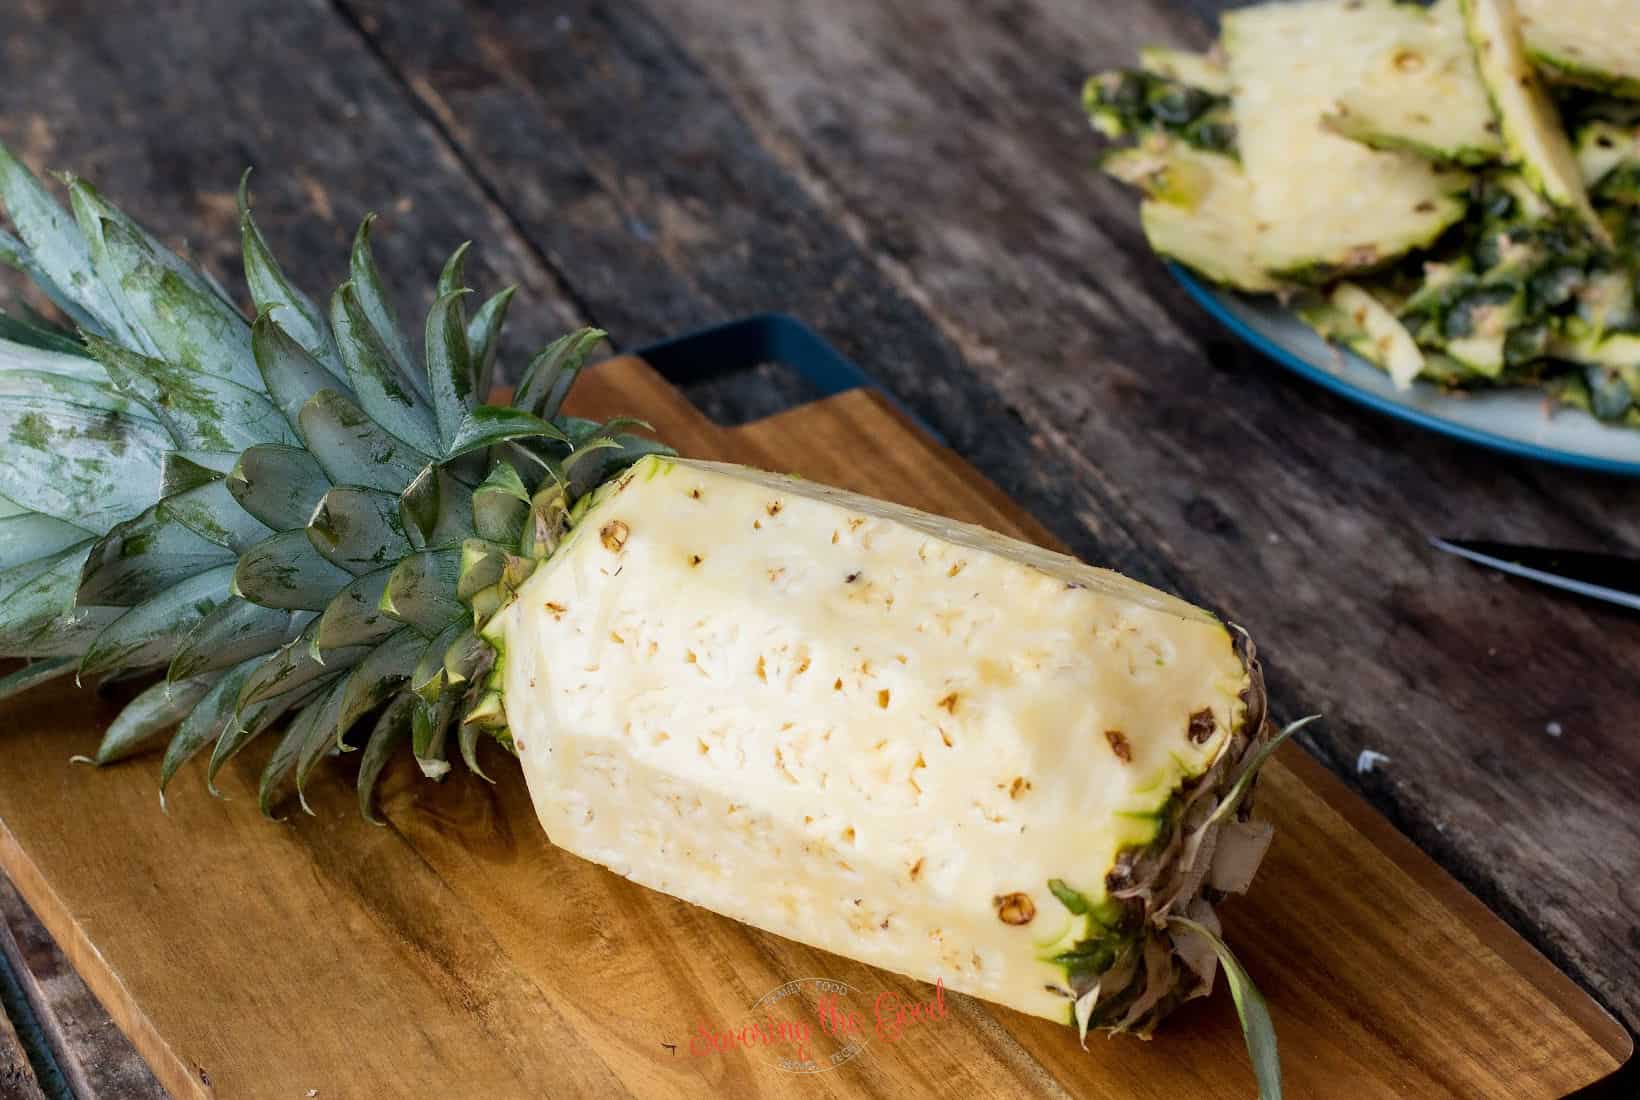 horizontal image of a peeled pineapple, pineapple top in place.